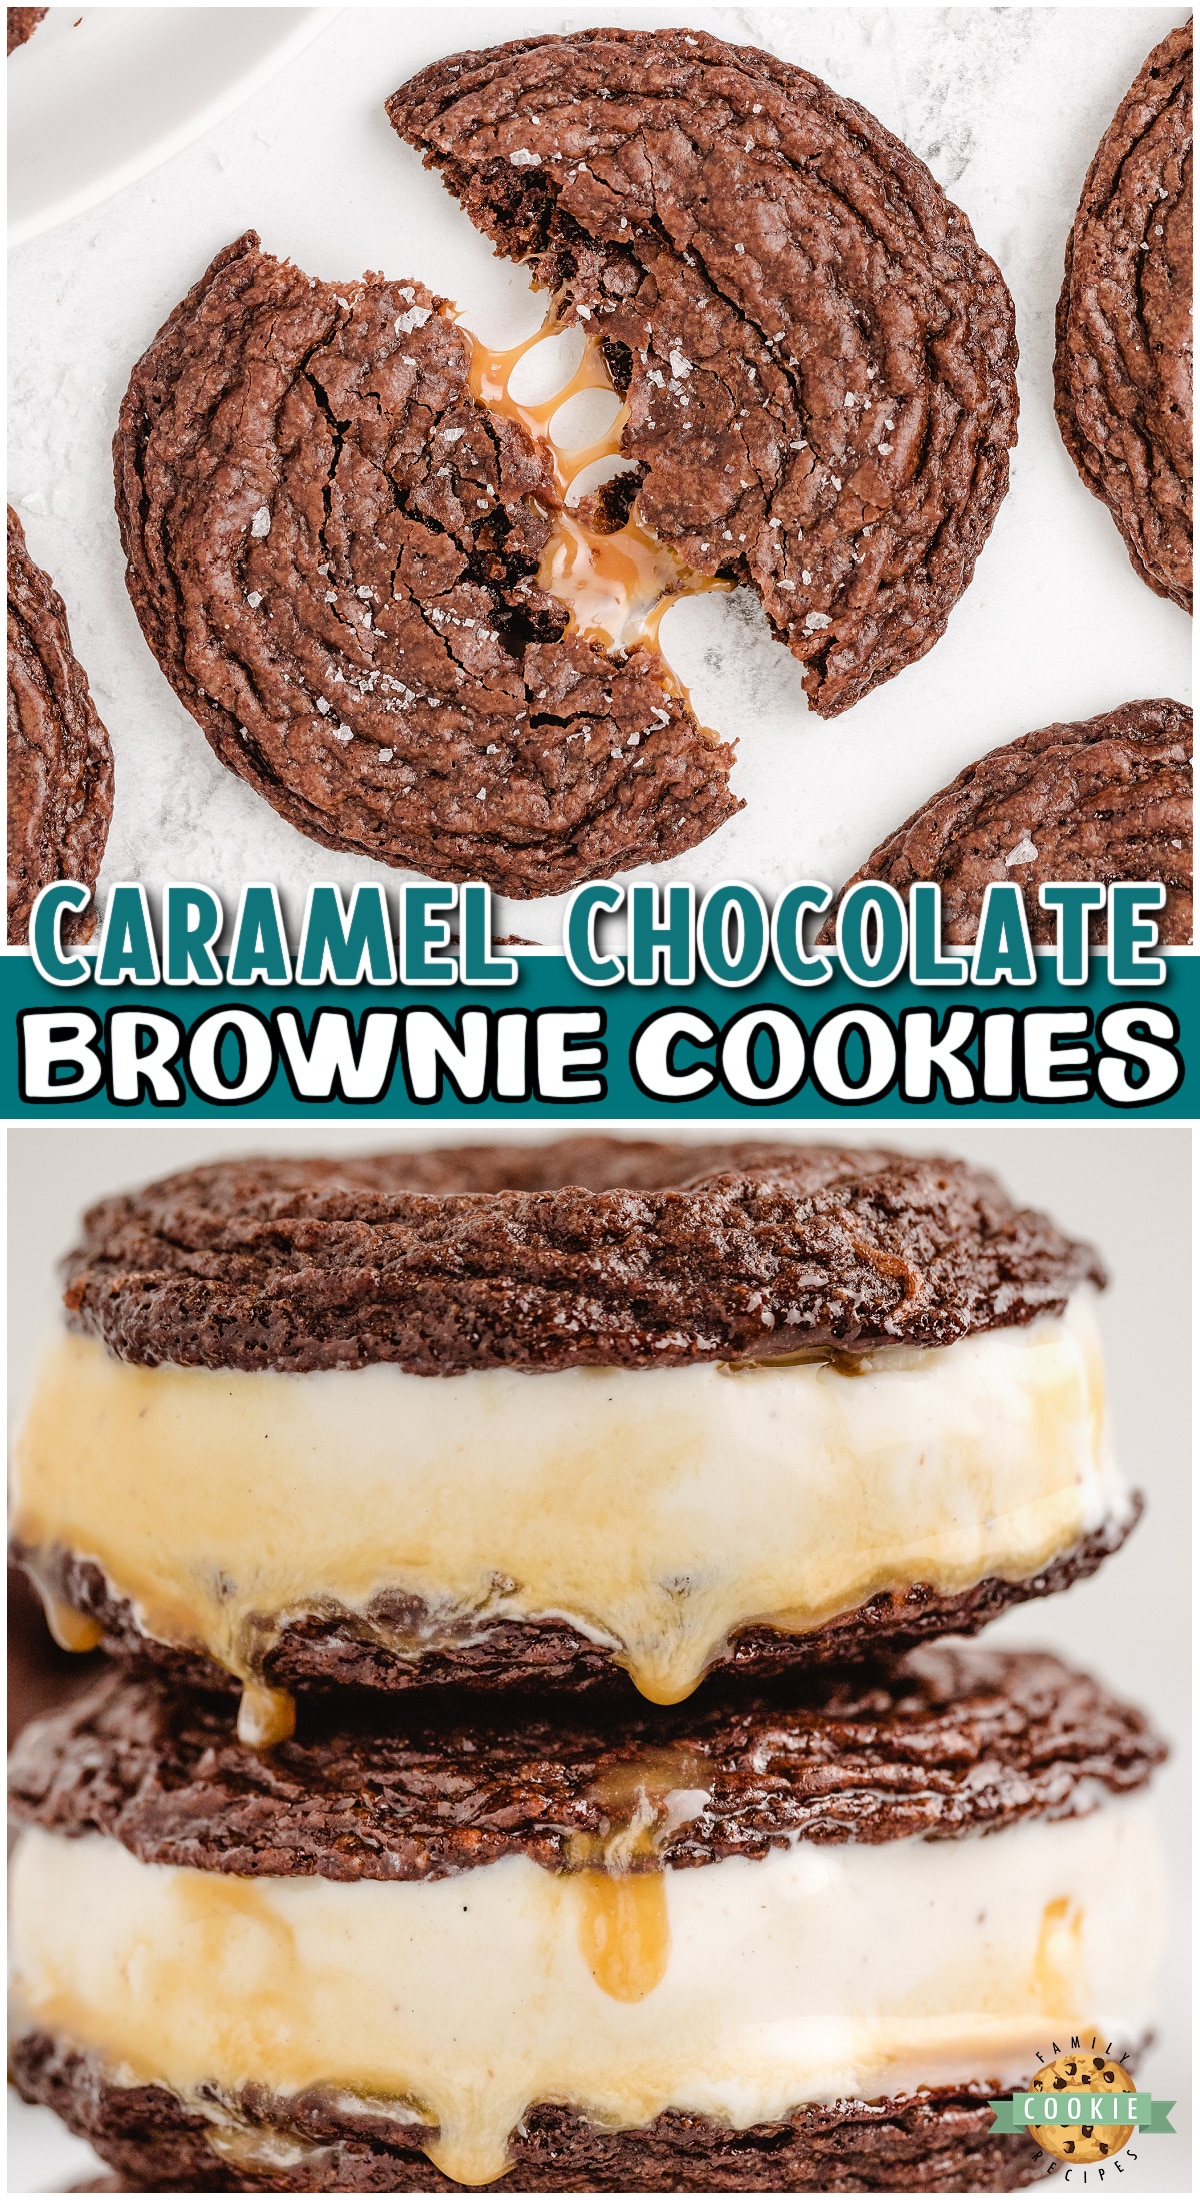 Caramel Brownie Cookies made with a brownie mix & stuffed with buttery soft caramels! Indulgent chocolate cookies with gooey caramel, perfect with a sprinkle of salt!